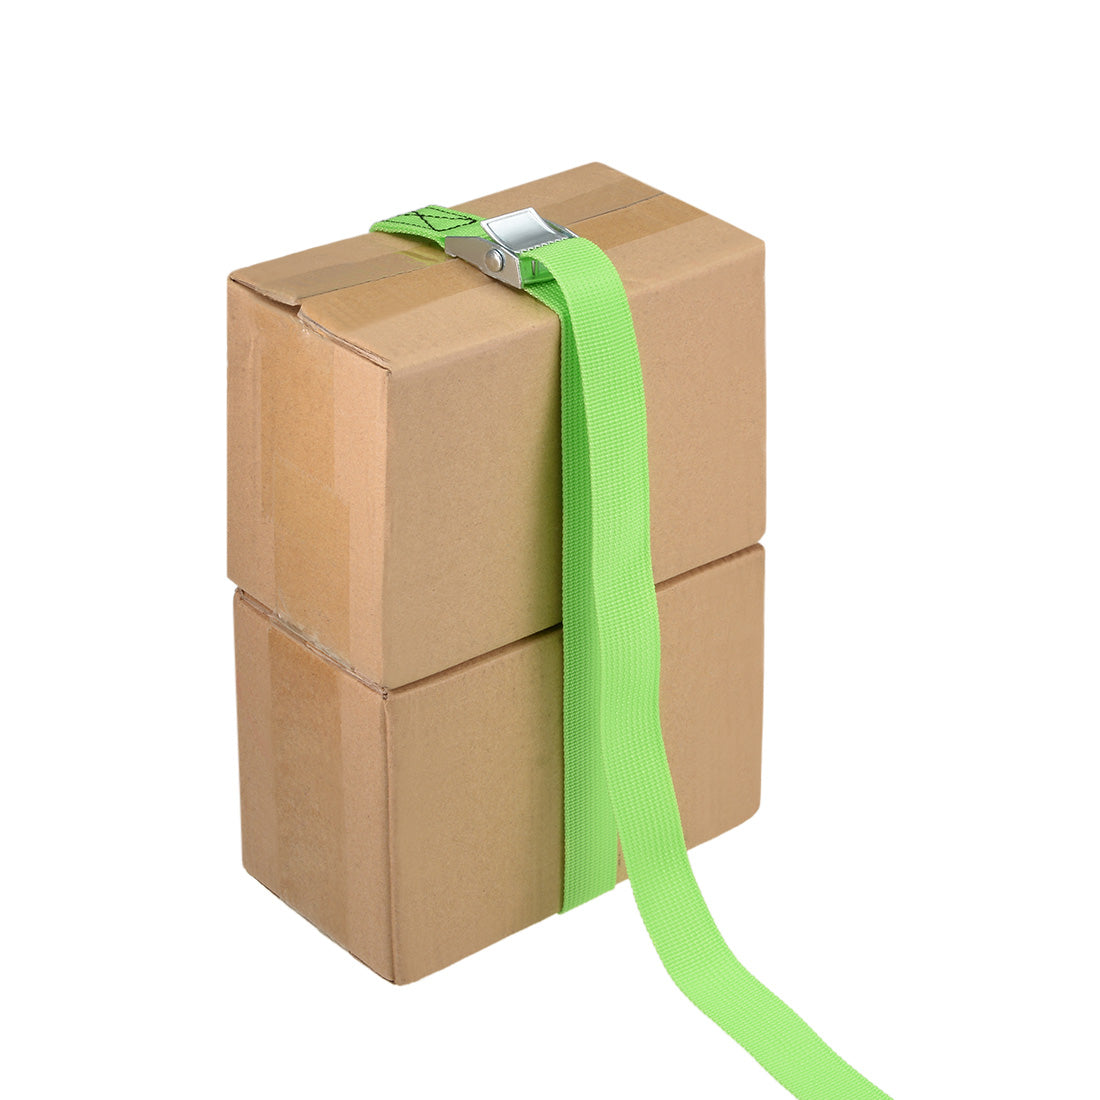 uxcell Uxcell Lashing Strap 1" x 3.3' Cargo Tie Down Straps with Cam Lock Buckle Up to 551lbs Green 4pcs